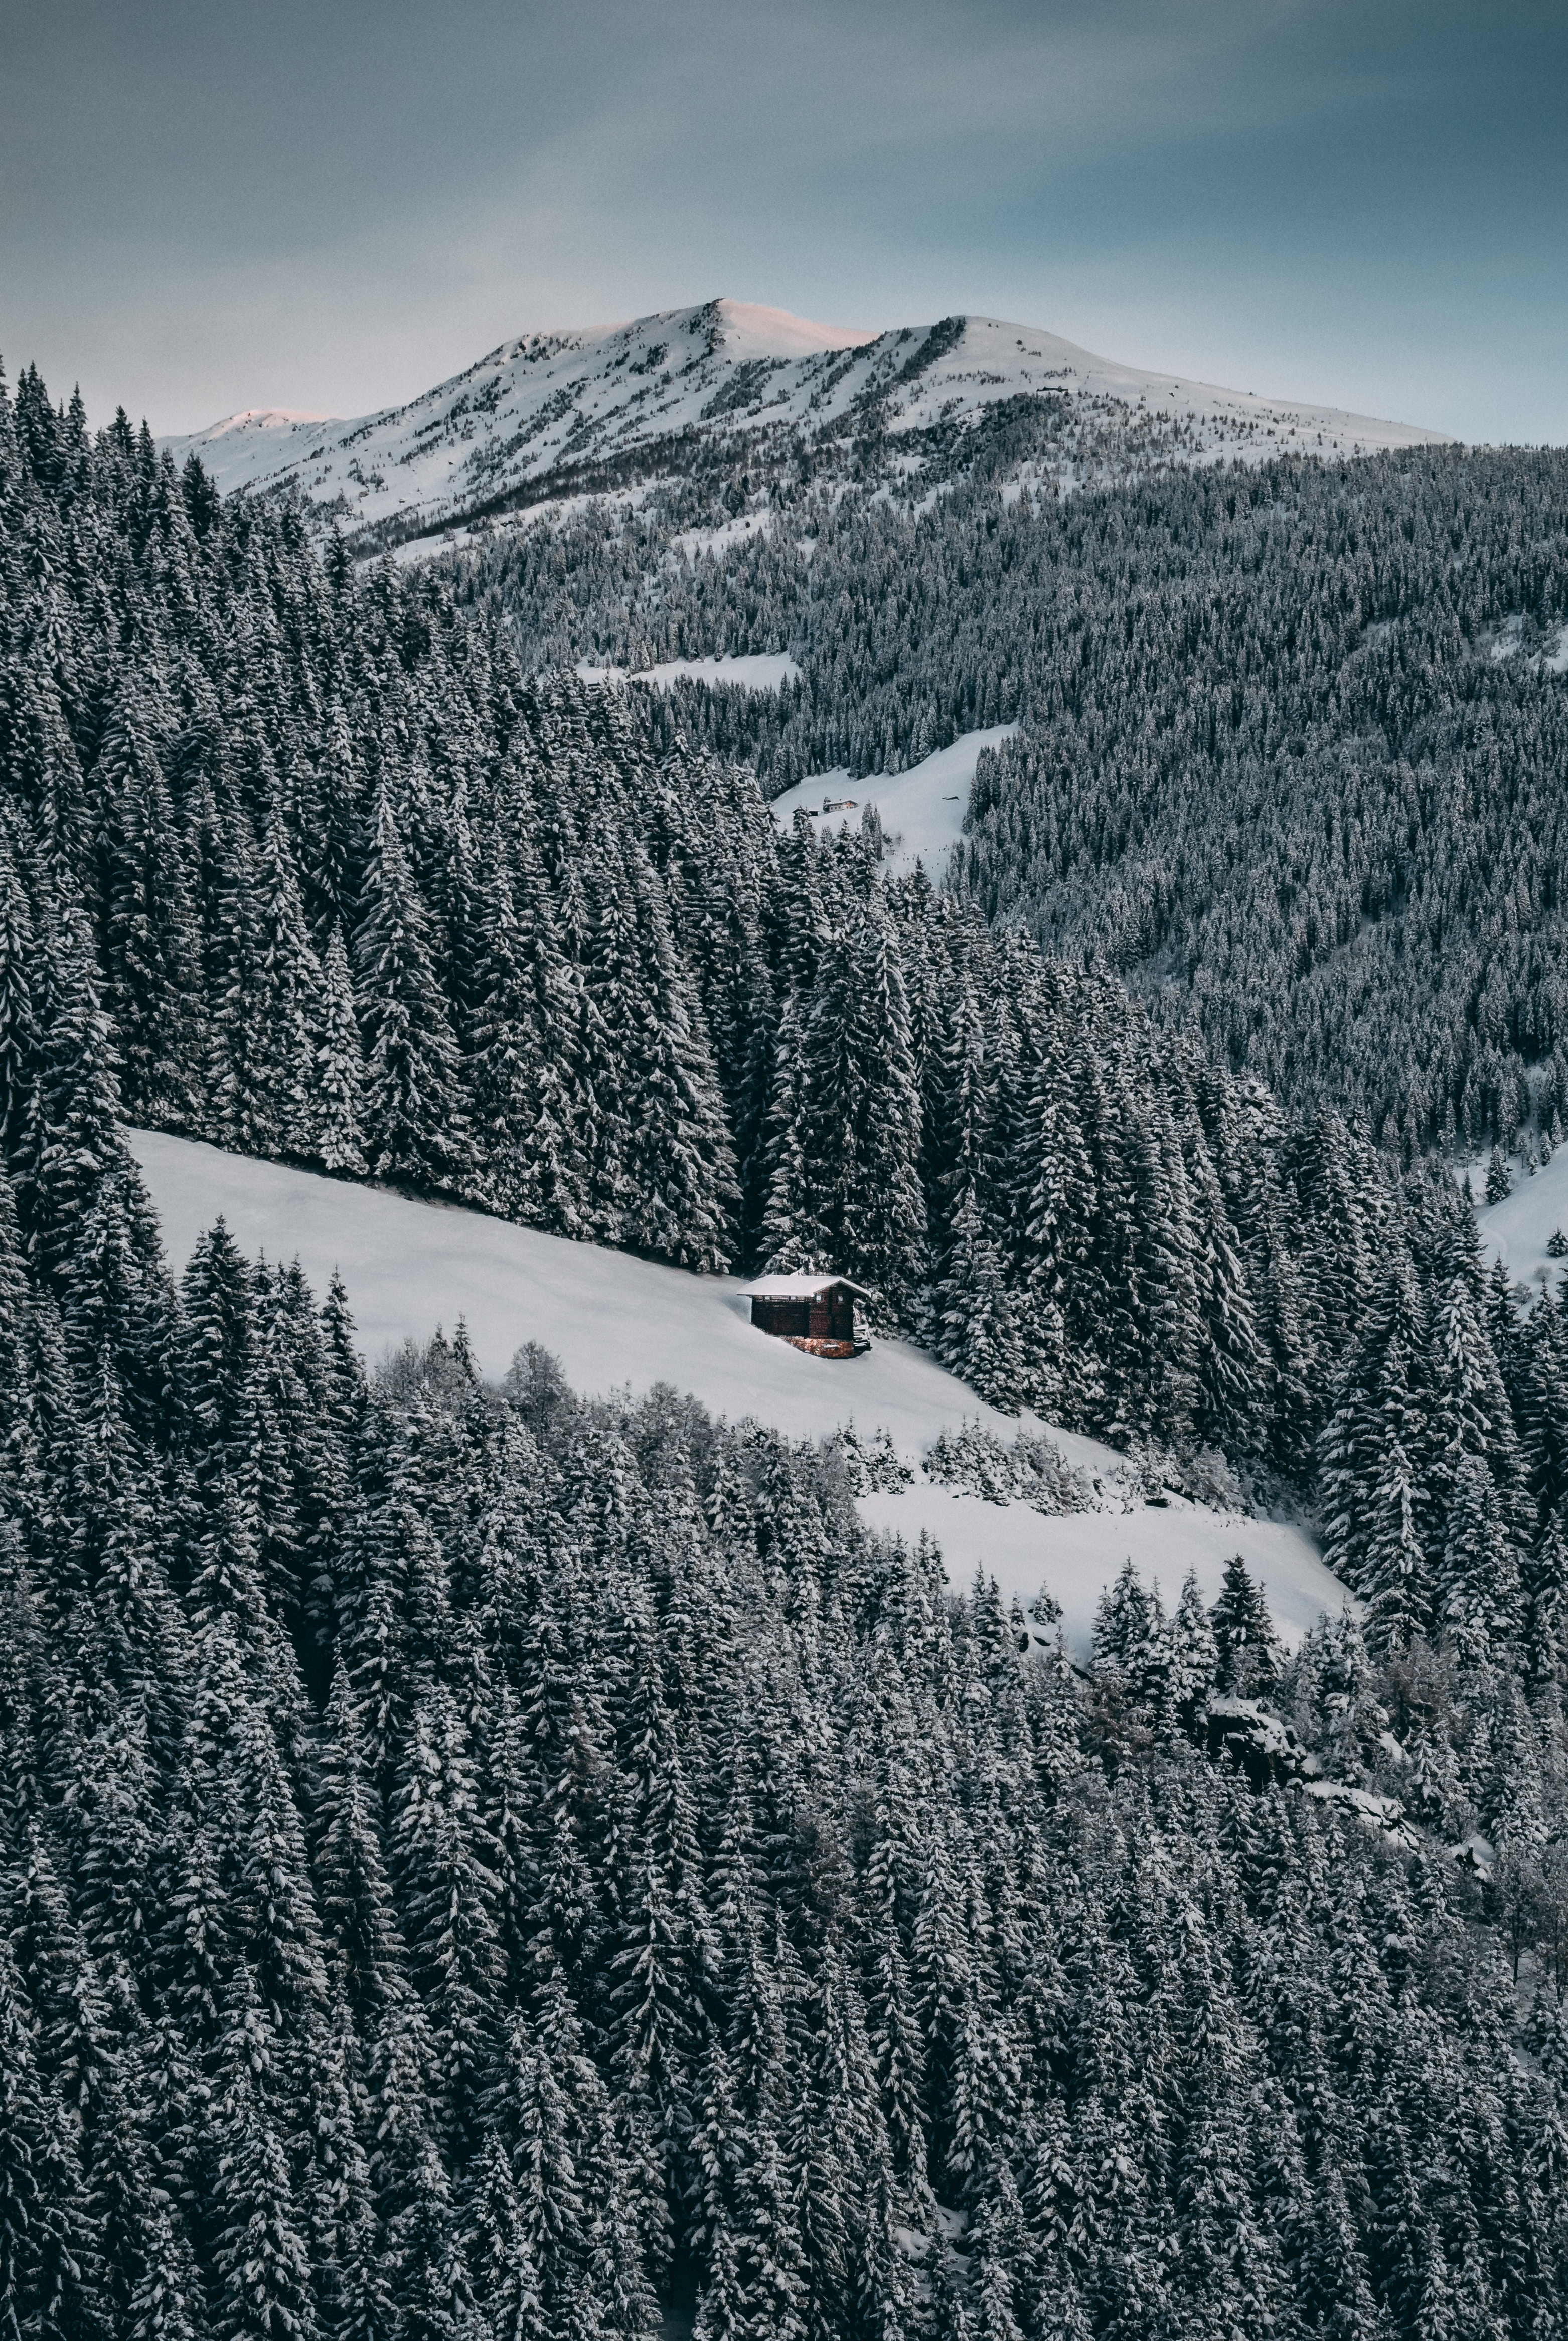 Free HD nature, winter, trees, sky, snow, forest, small house, lodge, elevation